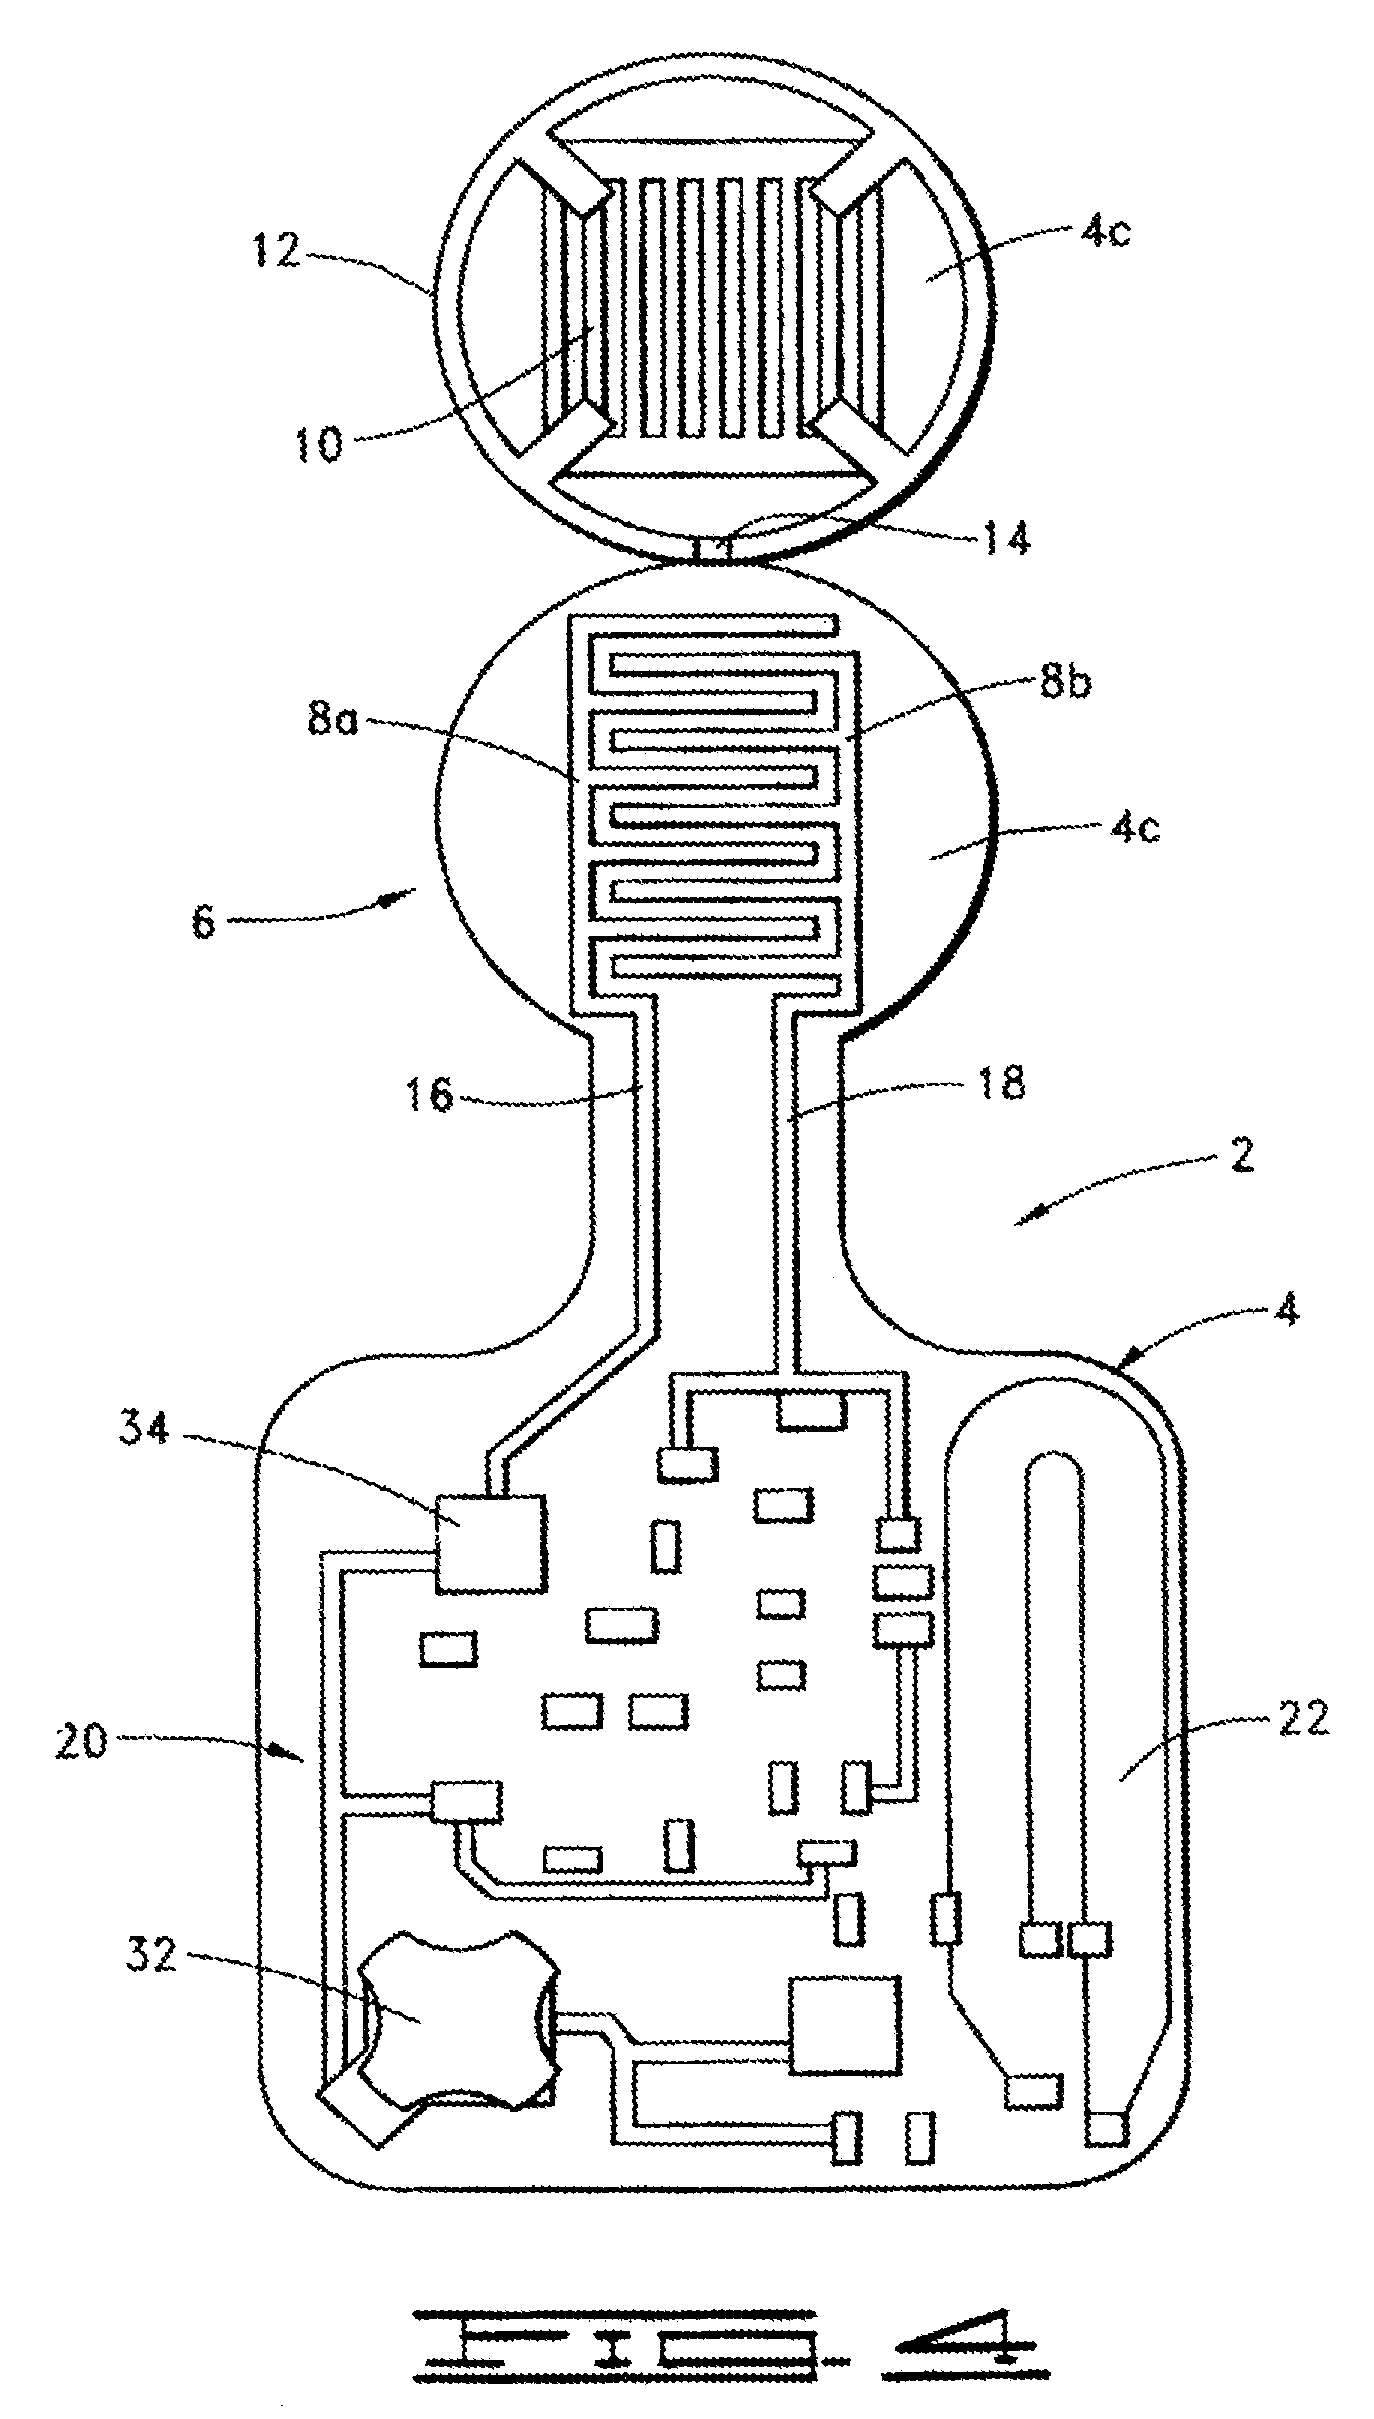 Active on-patient sensor, method and system